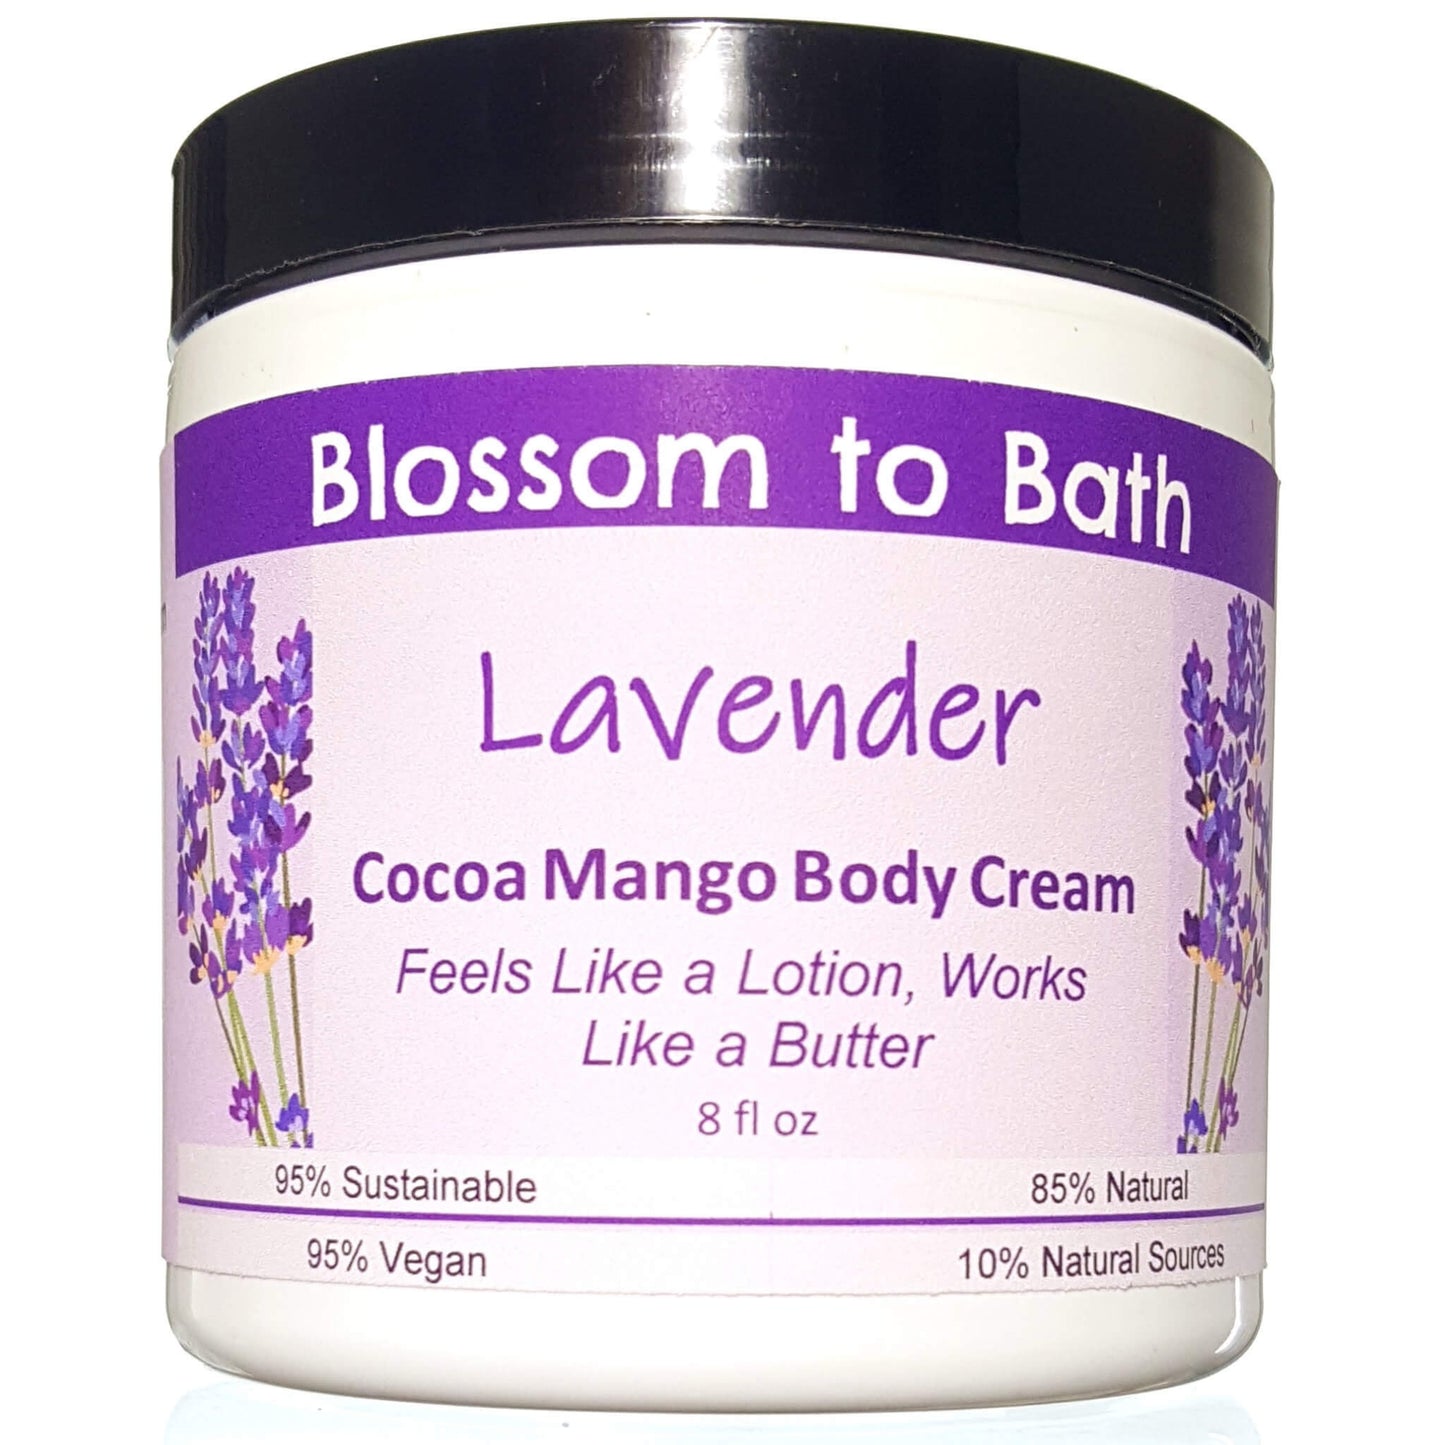 Buy Blossom to Bath Lavender Cocoa Mango Body Cream from Flowersong Soap Studio.  Rich organic butters luxury soften and moisturize even the roughest skin all day  Classic lavender scent that is relaxing and comforting.